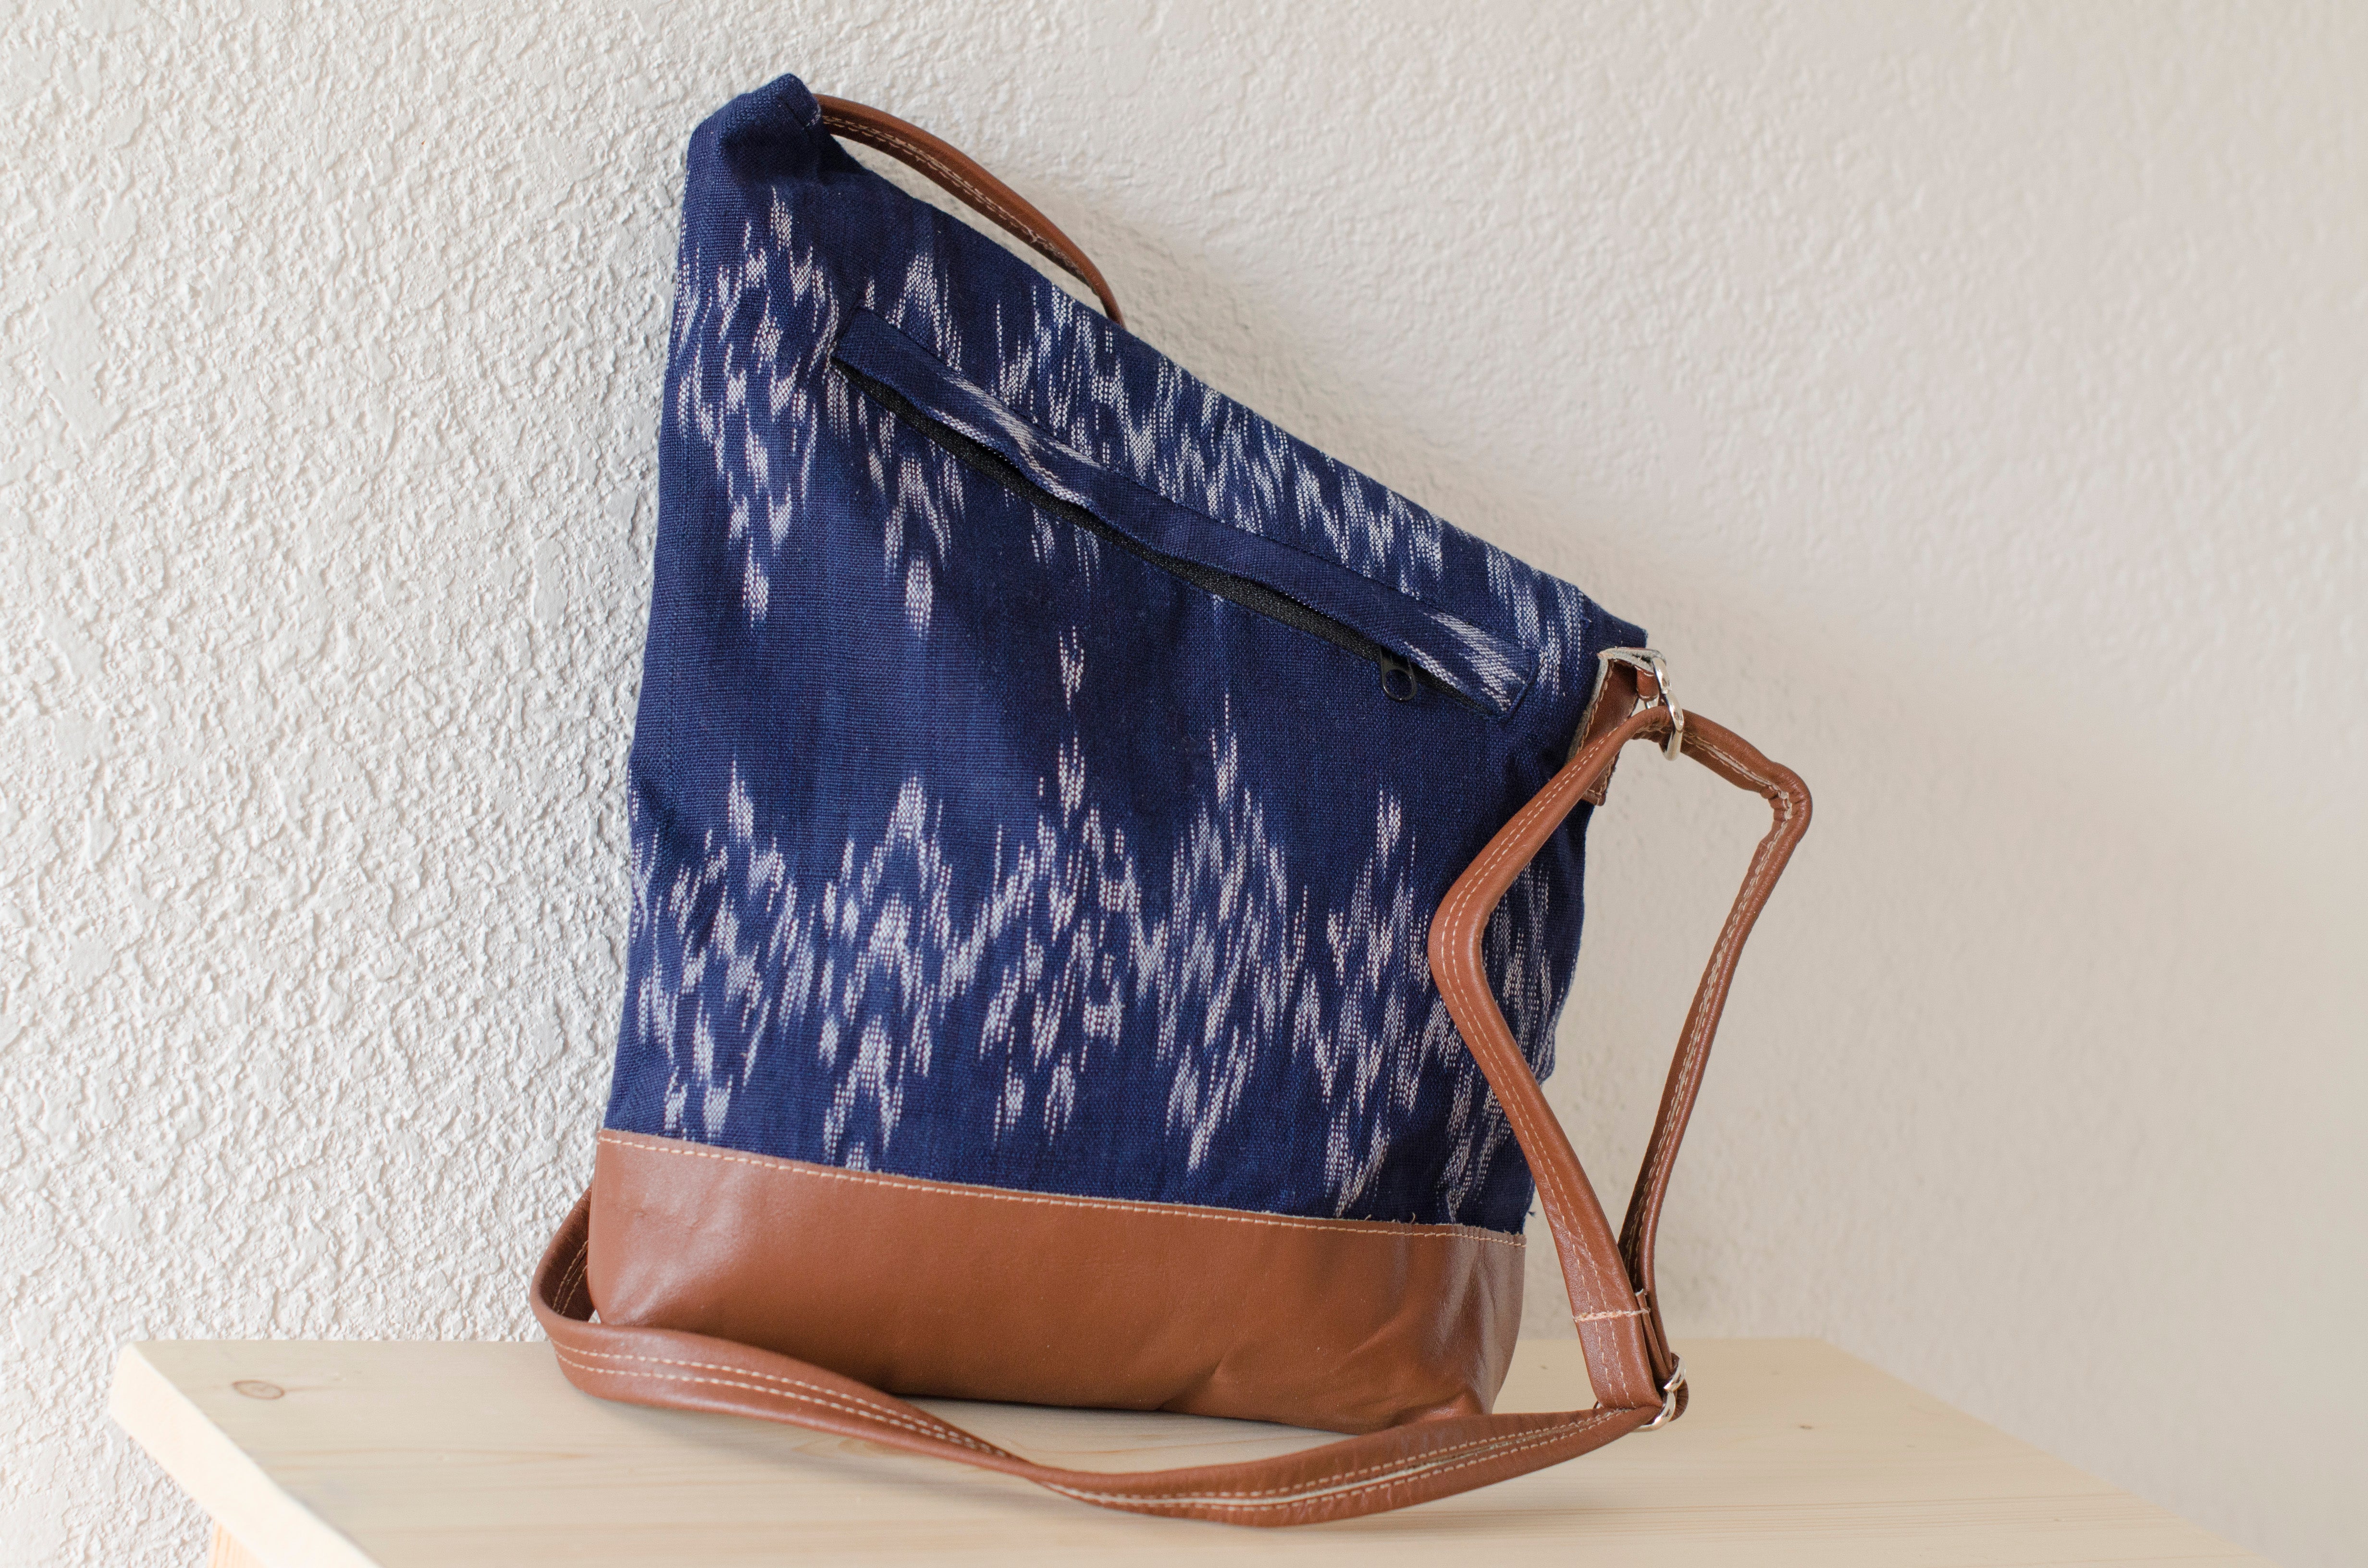 Buy Handcrafted Jawaja Leather Sling Bag with Rug Patch - Indigo Online